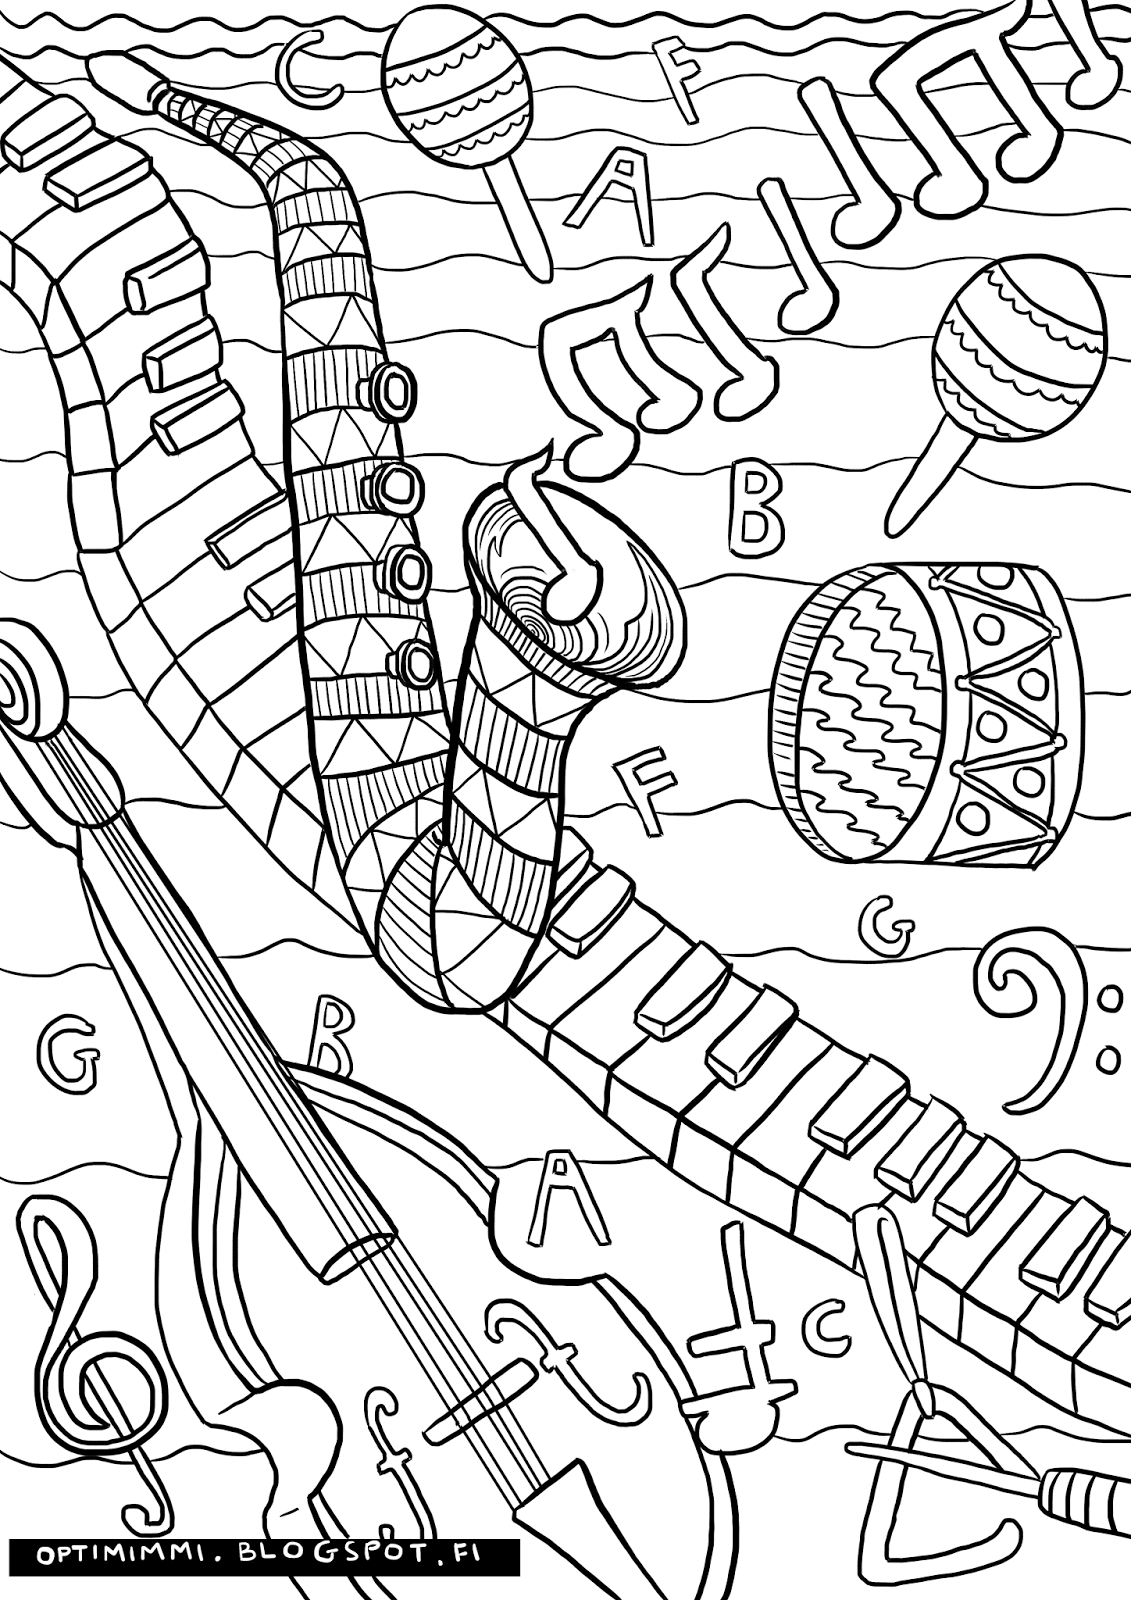 colouring pictures of musical instruments optimimmi 2016 coloring pages 2016 värityskuvat pictures of instruments colouring musical 